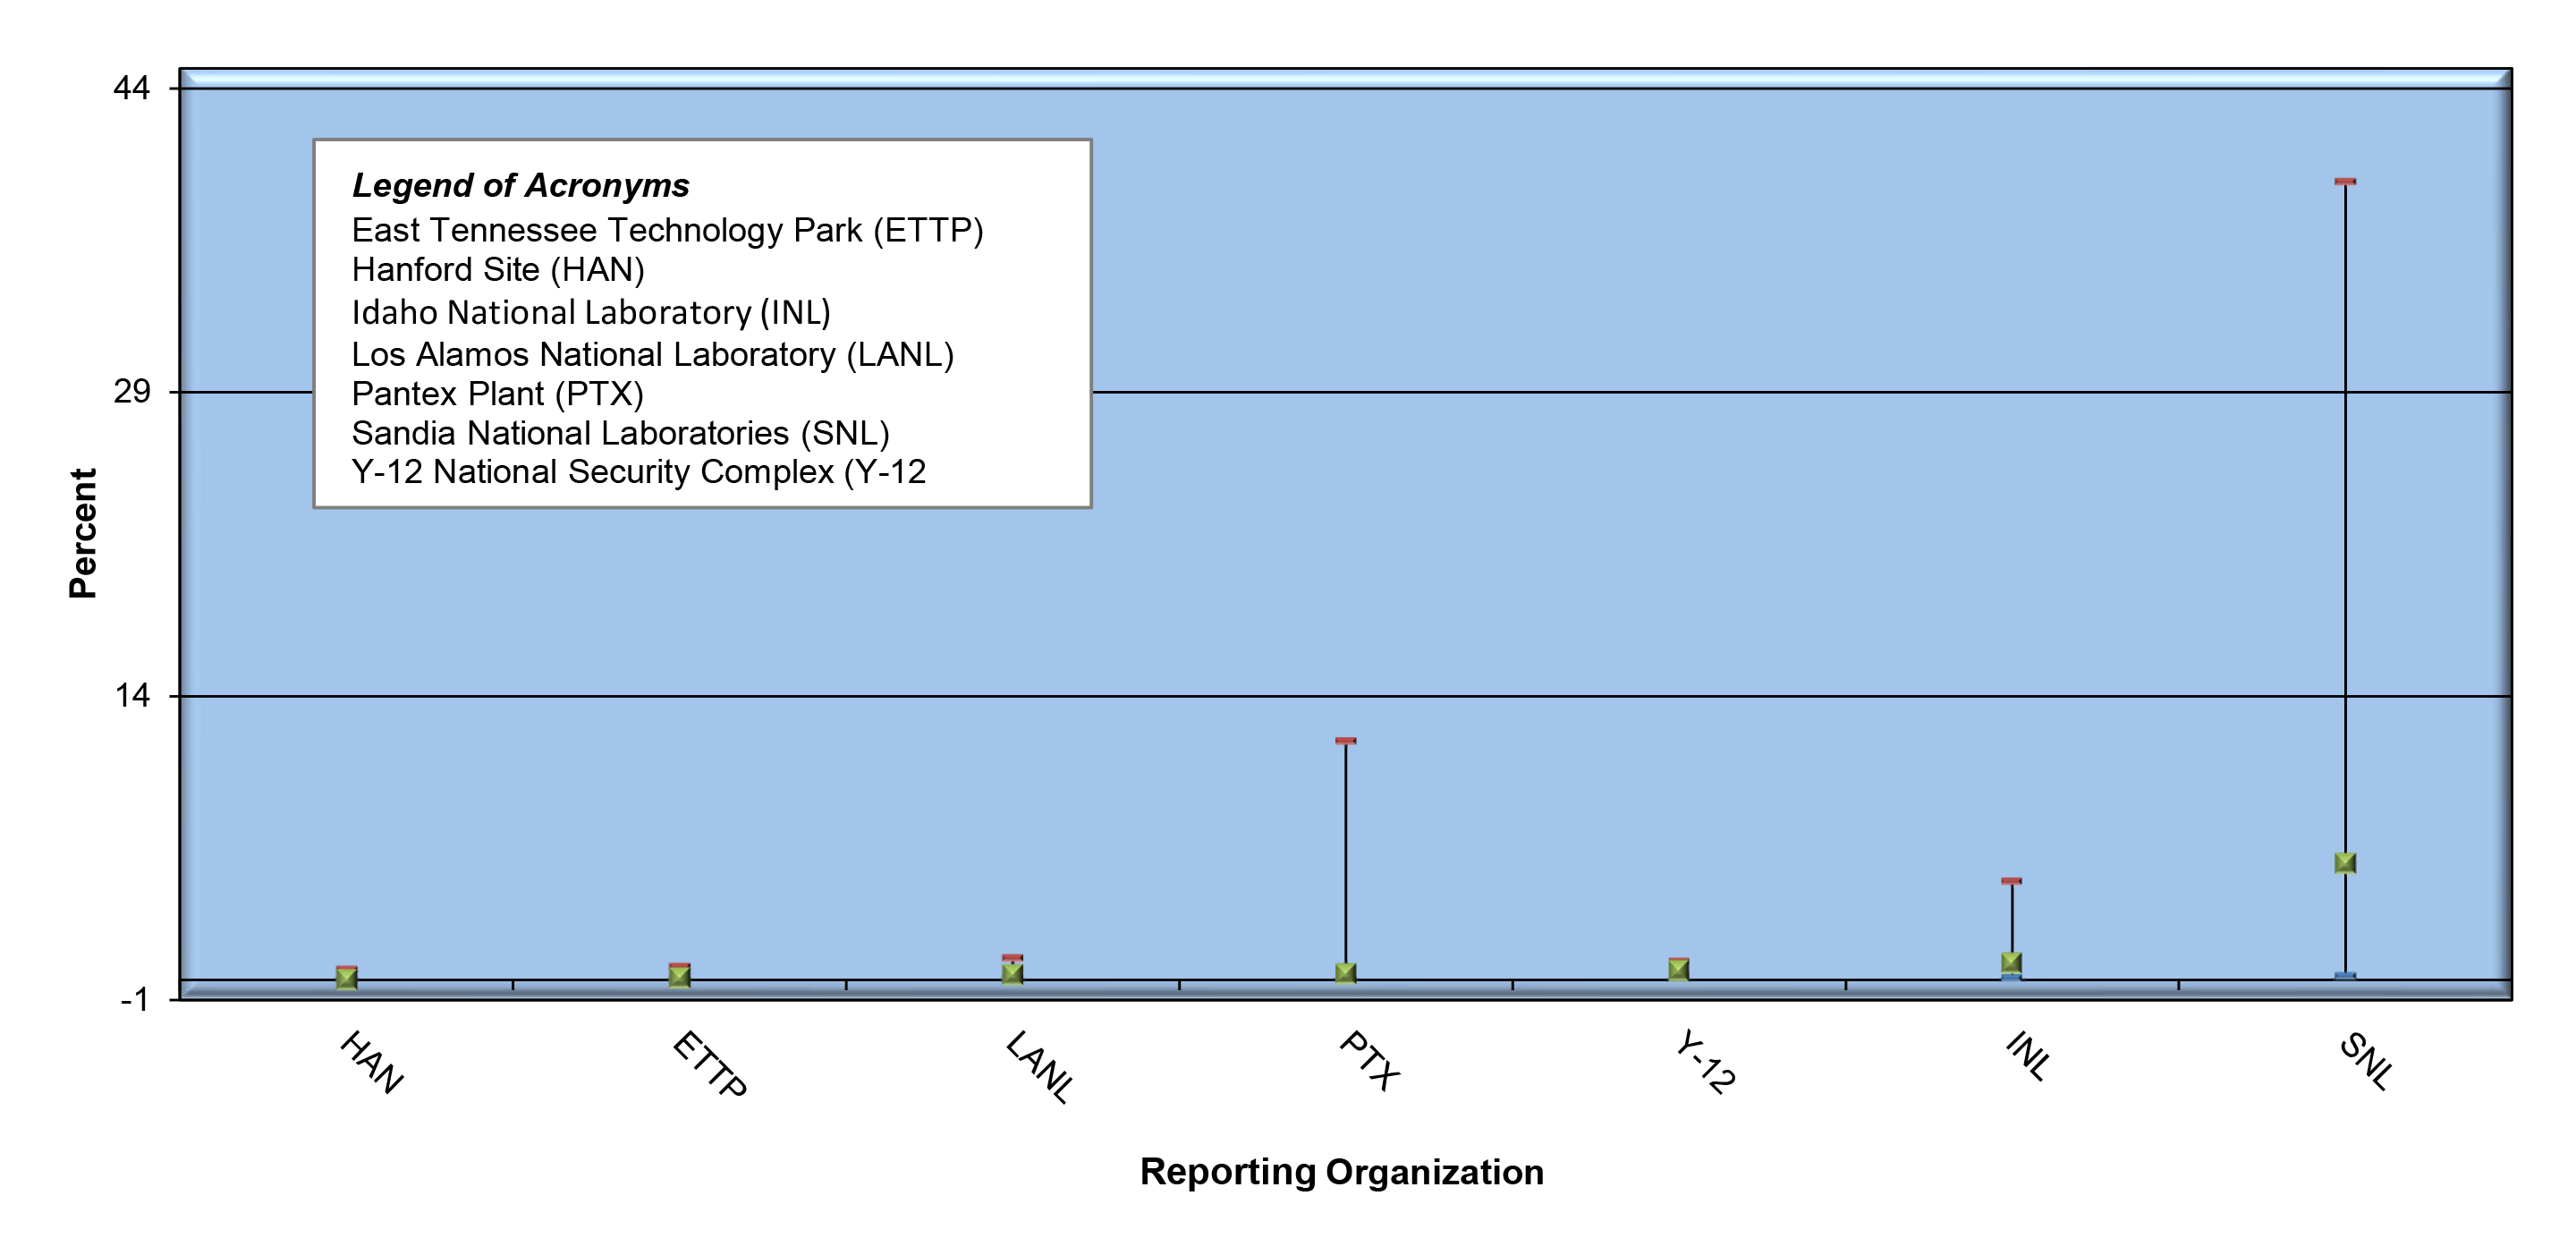 Exposure Monitoring Results Exceeding Action Level 0.2 μg/m3 by Reporting Organization (2020) * infographic